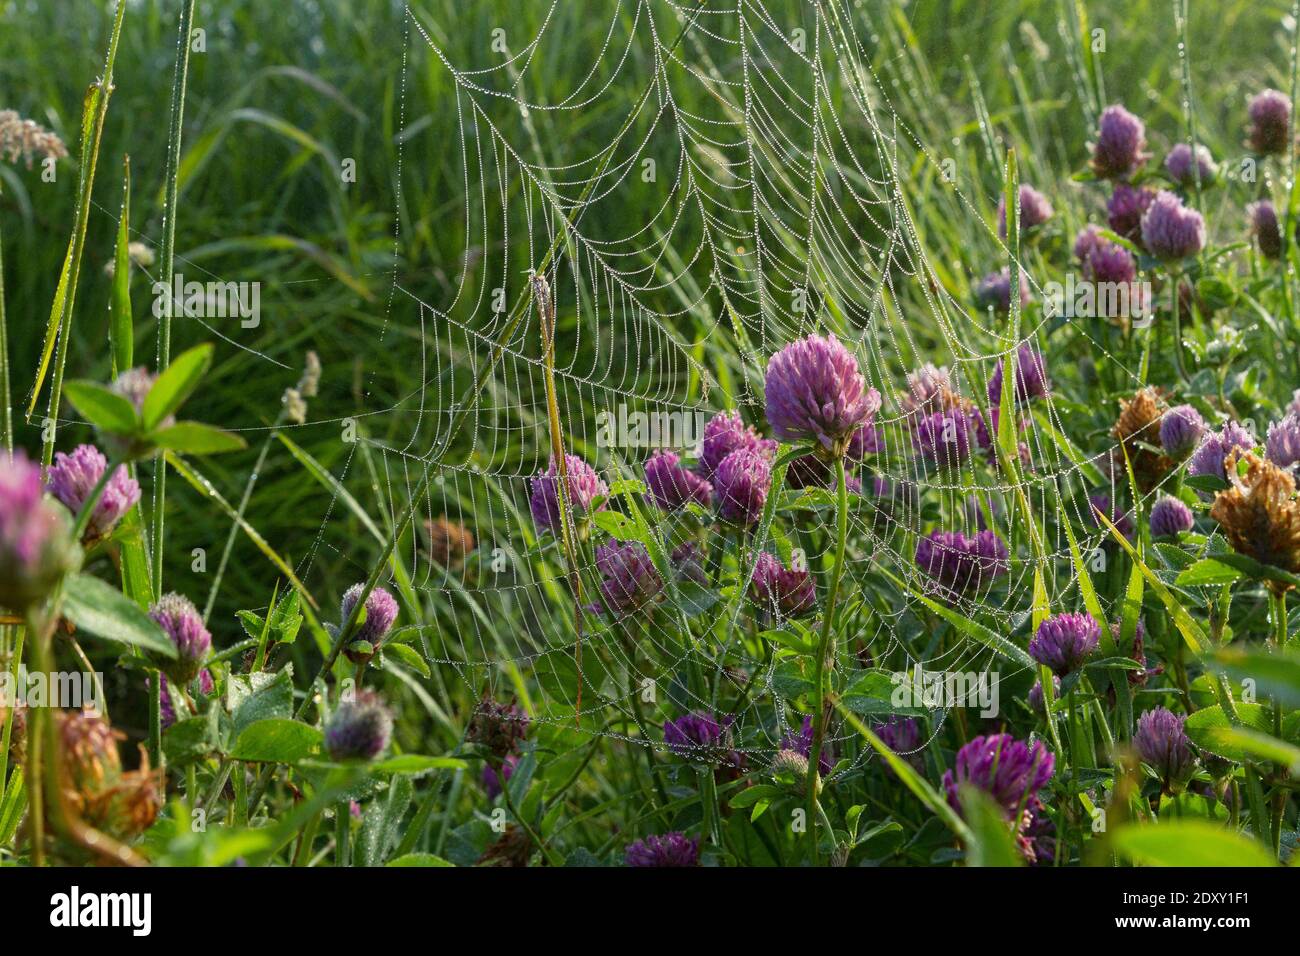 A summer morning full of small wonders. Clover in a web covered with dew Stock Photo